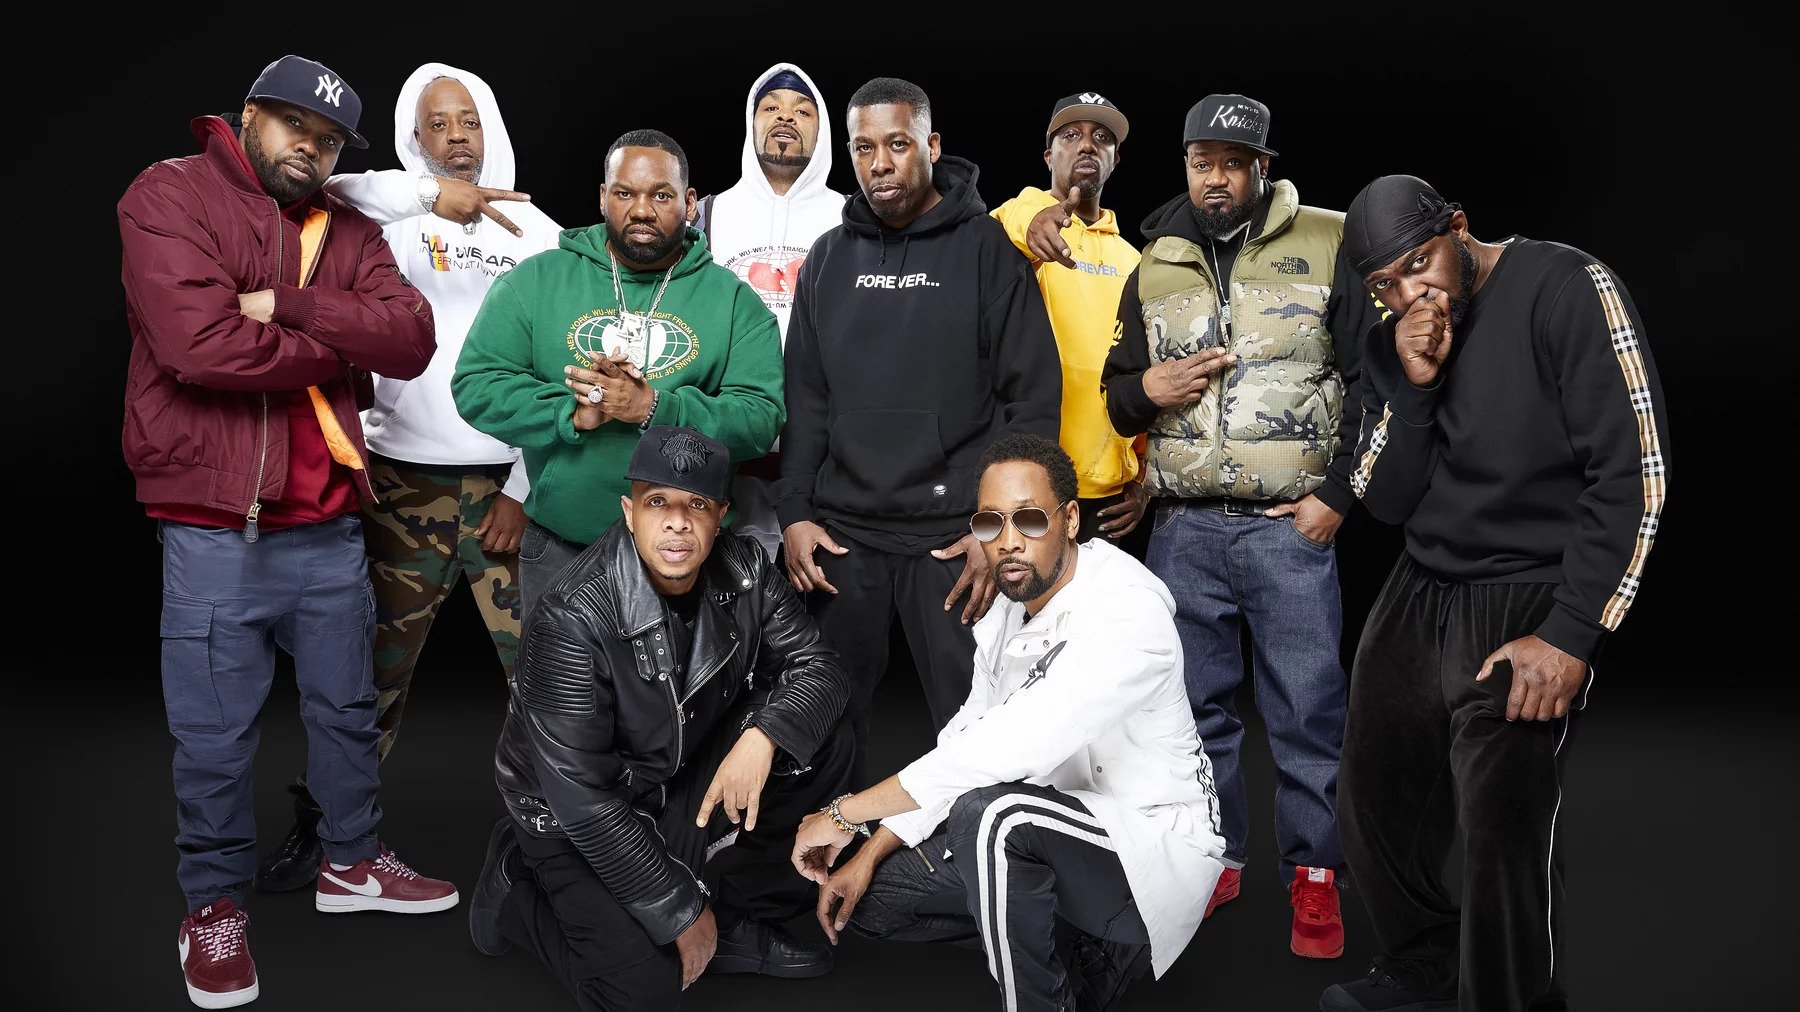 Wu-Tang Clan Celebrates 25th Anniversary Of ‘Wu-Tang Forever’